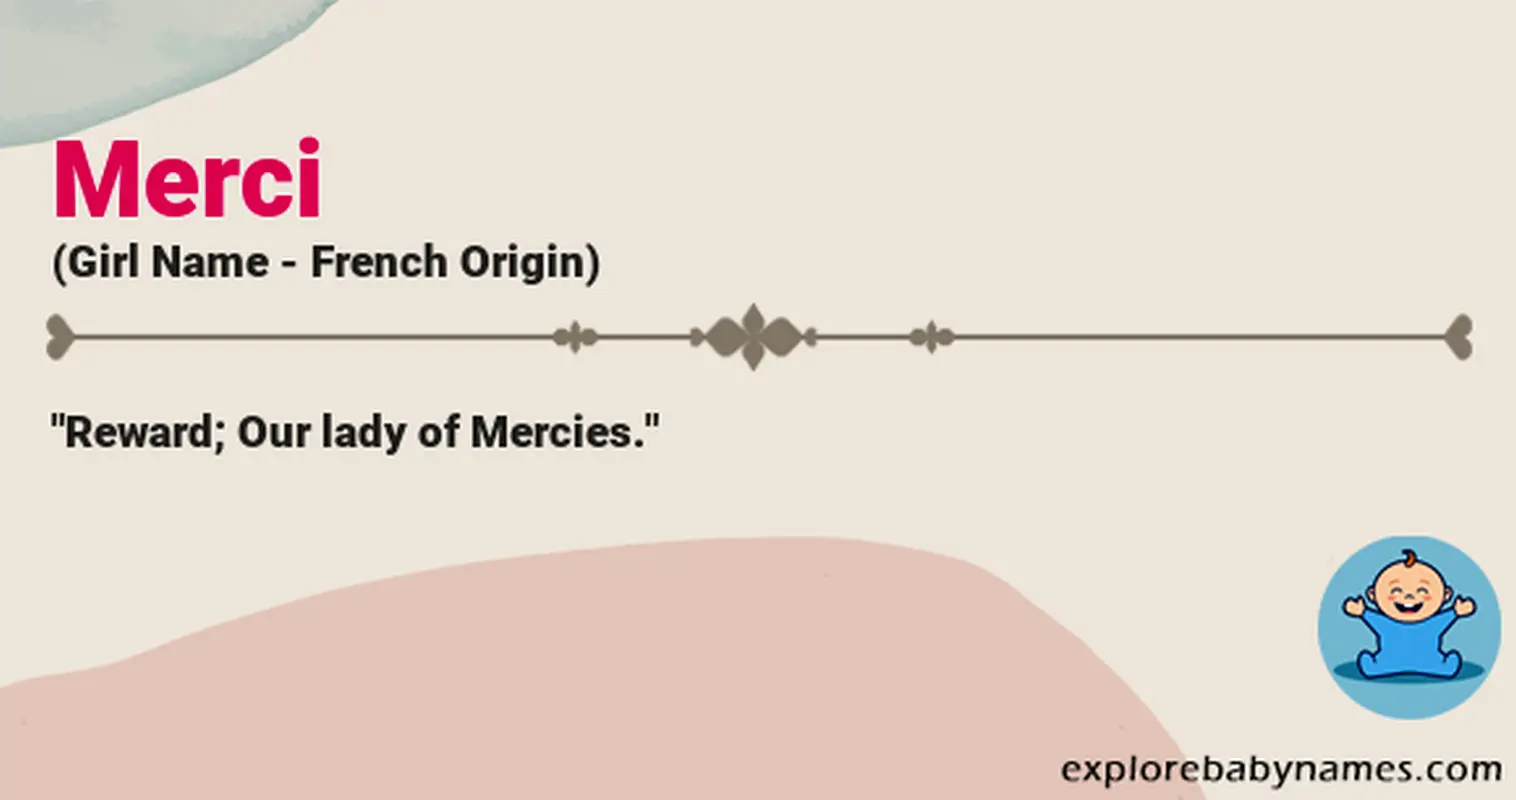 Meaning of Merci